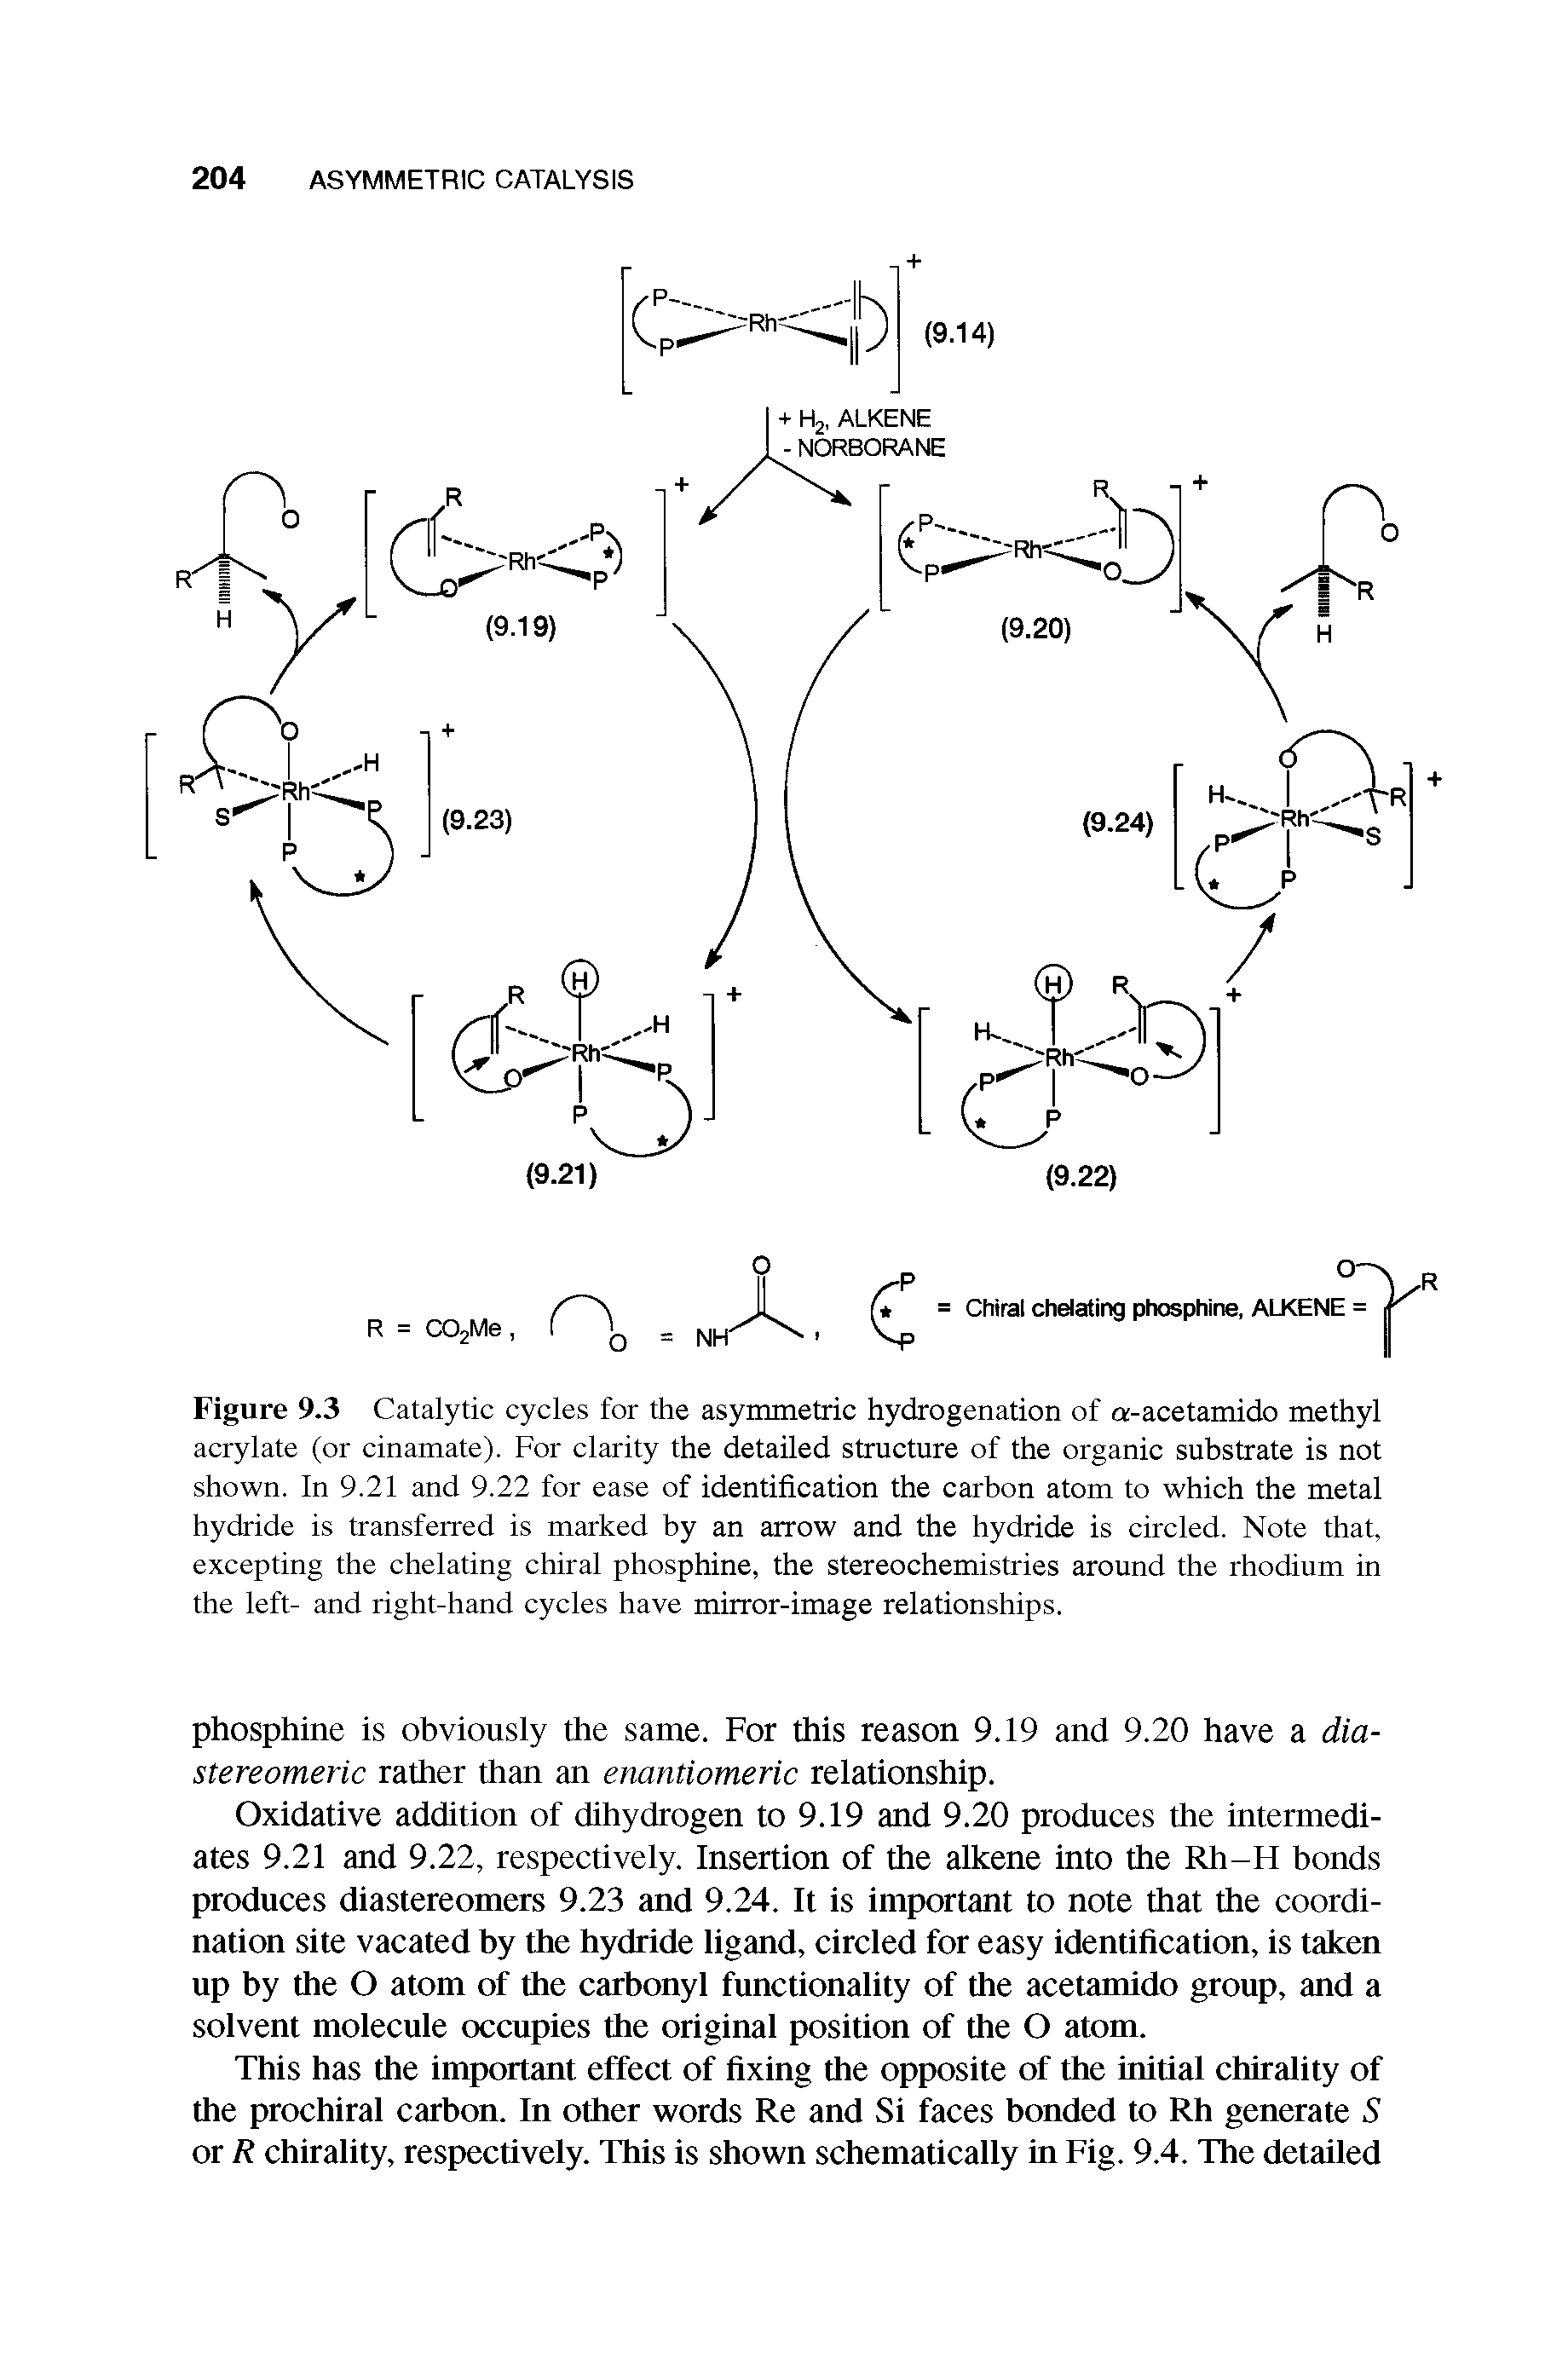 Figure 9.3 Catalytic cycles for the asymmetric hydrogenation of a-acetamido methyl acrylate (or cinamate). For clarity the detailed structure of the organic substrate is not shown. In 9.21 and 9.22 for ease of identification the carbon atom to which the metal hydride is transferred is marked by an arrow and the hydride is circled. Note that, excepting the chelating chiral phosphine, the stereochemistries around the rhodium in the left- and right-hand cycles have mirror-image relationships.